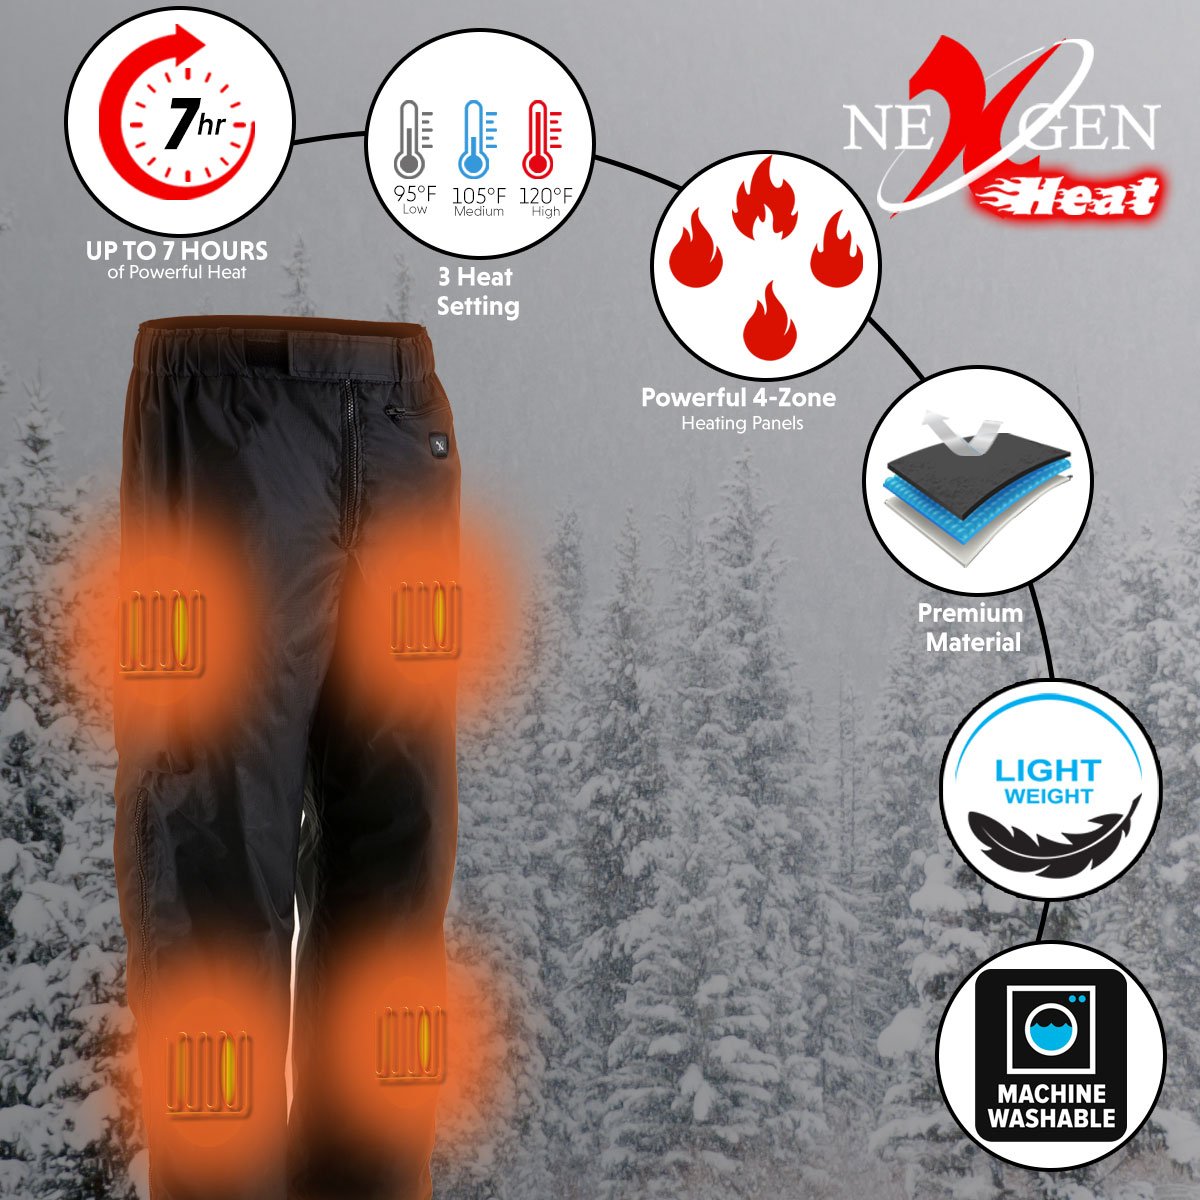 Nexgen Heat ' Torrid' Black Heated Textile Water Resistant Over Pants (Rechargeable Battery Pack Included)